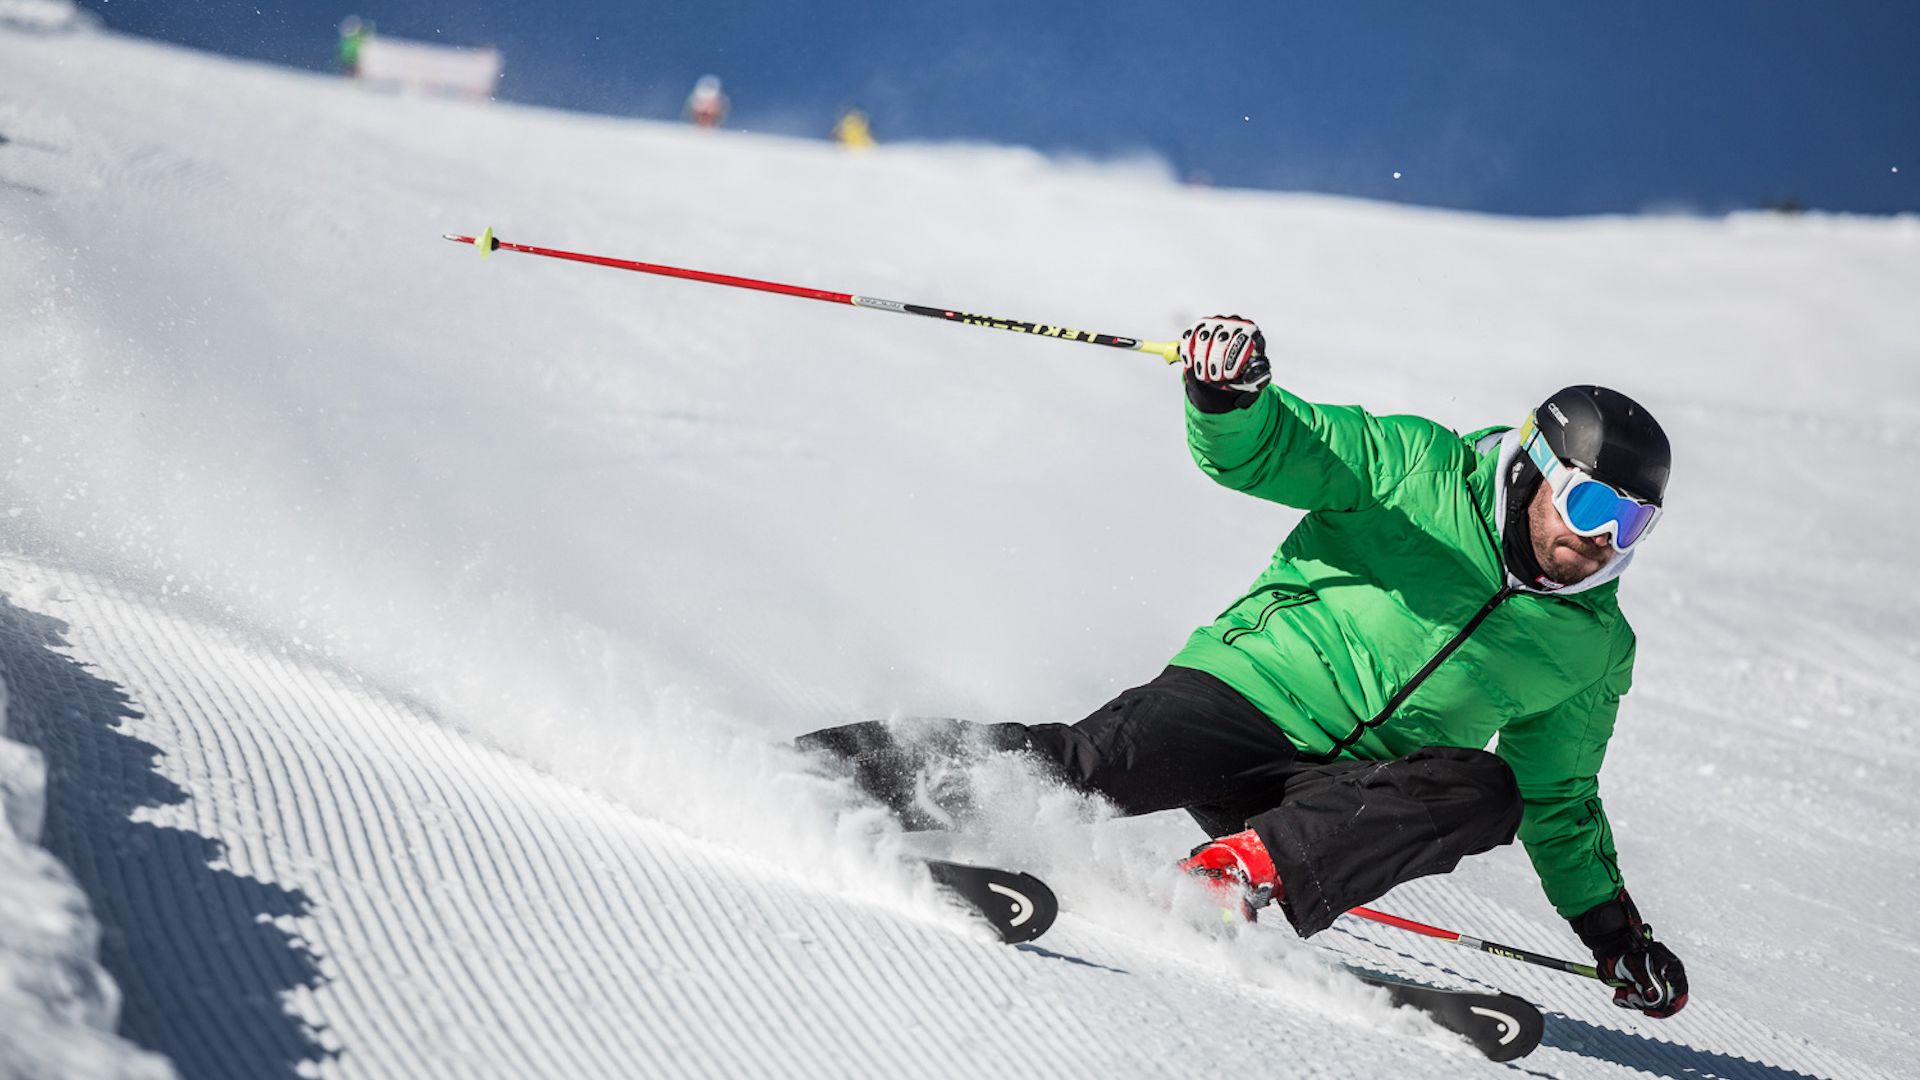 A Skier Going Down A Slope